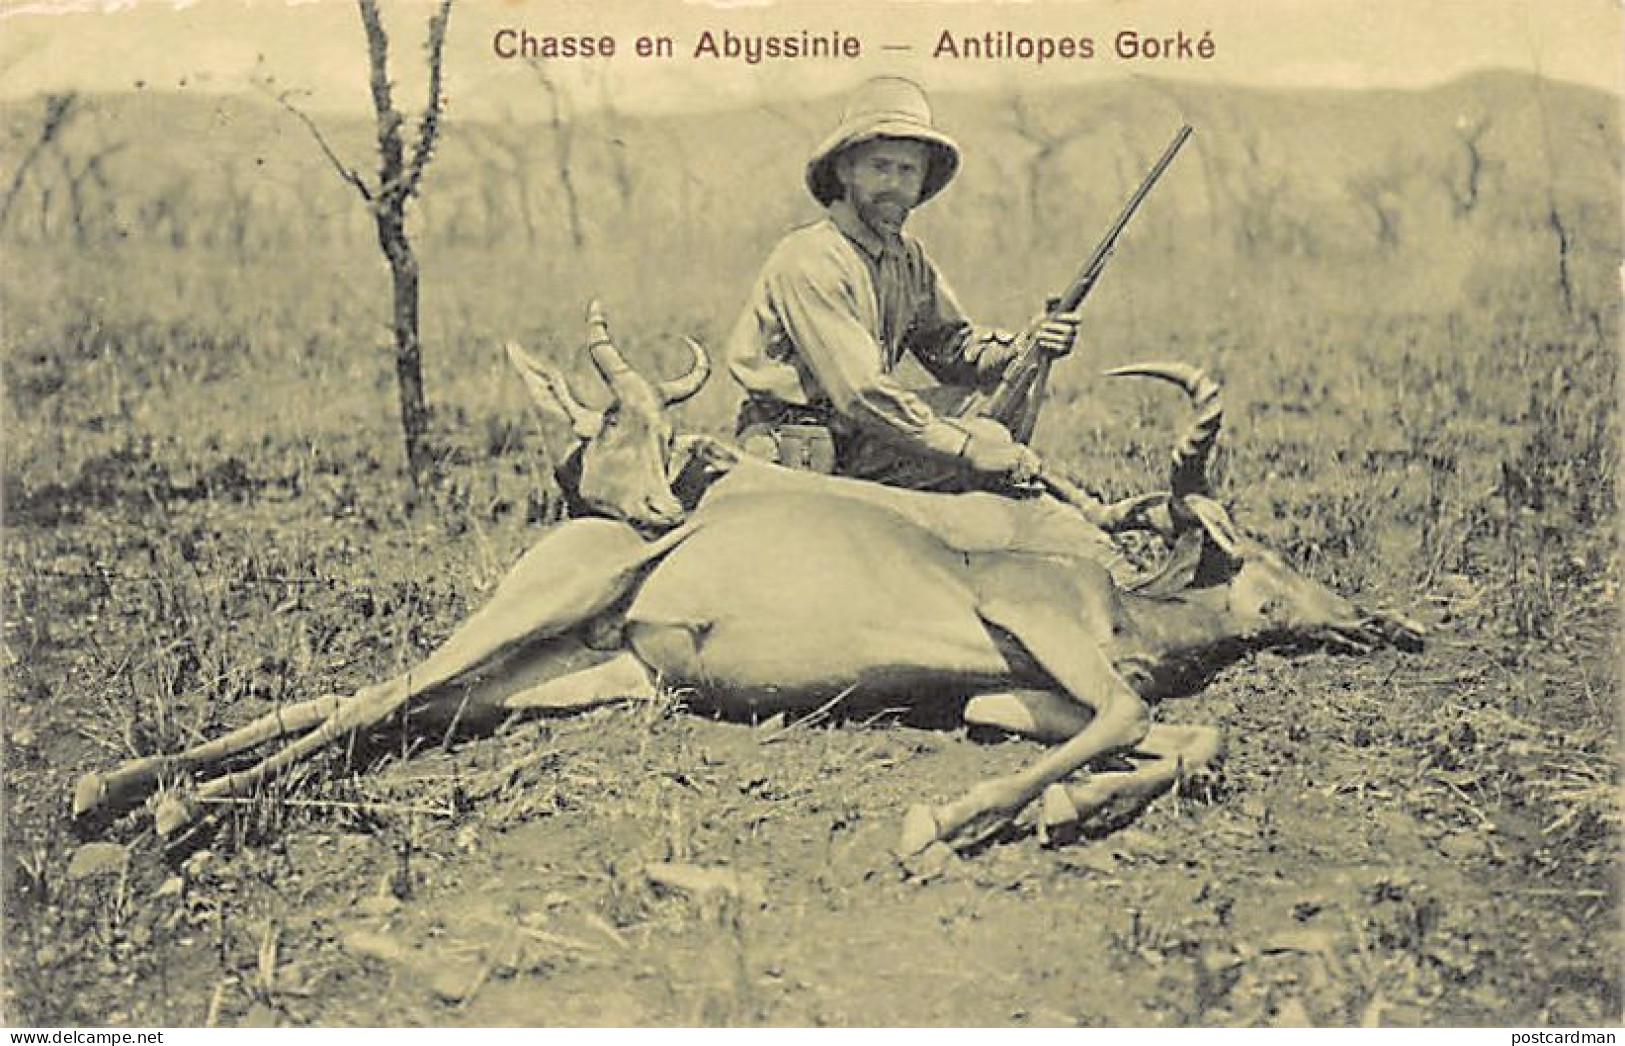 Ethiopia - Hunting In Abyssinia - Gorke Antelopes - Publ. J. A. Michel 6869 - Ethiopie